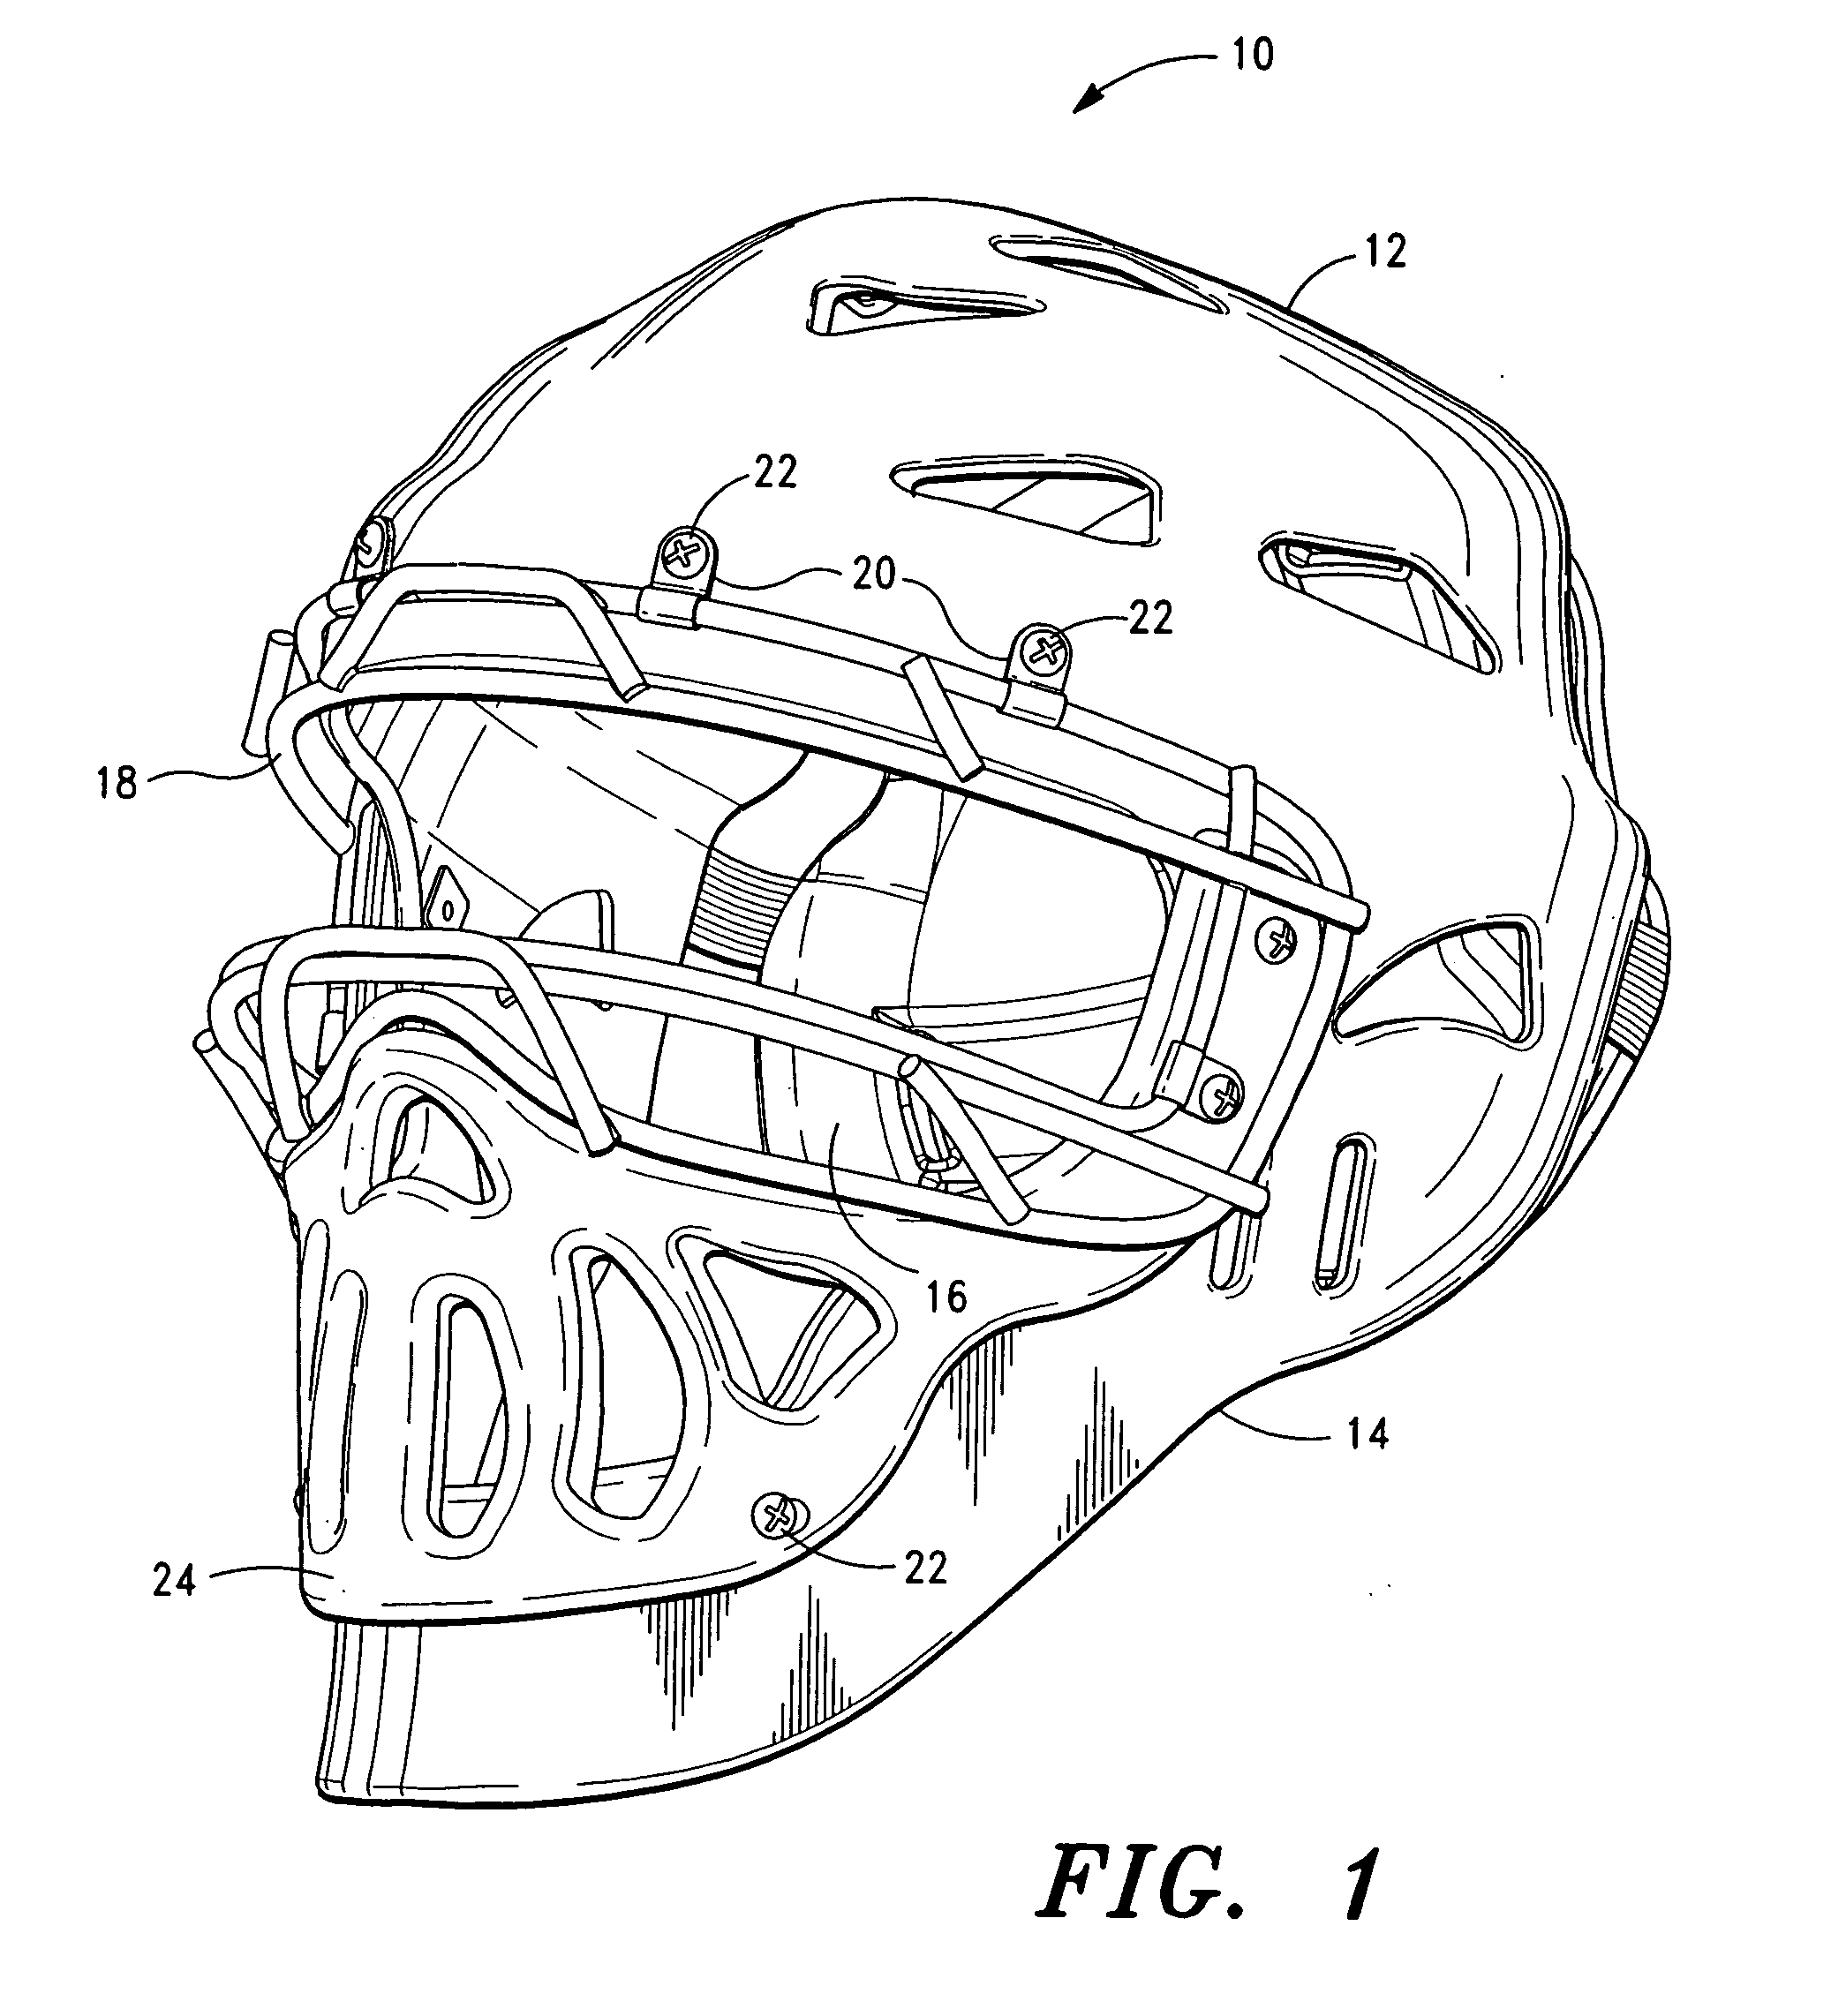 Protective sports helmet having a two-piece face cage